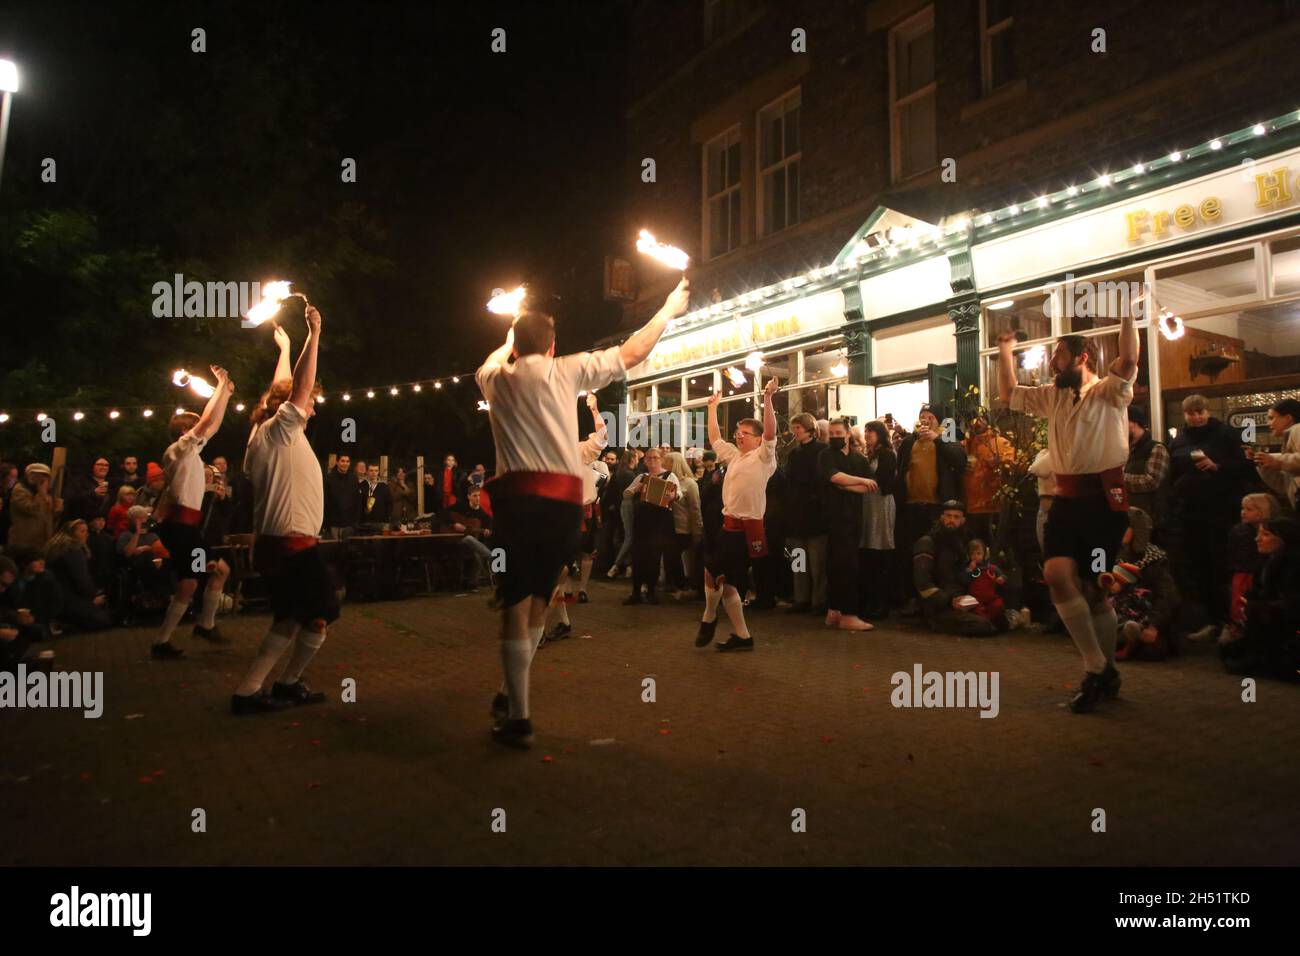 Newcastle upon Tyne, UK, 5th November 2021, Kingsman fire dance, a traditional folk celebration on Guy Fawkes night at the Cumberland Arms Pub, Credit: DEW/AlamyLive Stock Photo